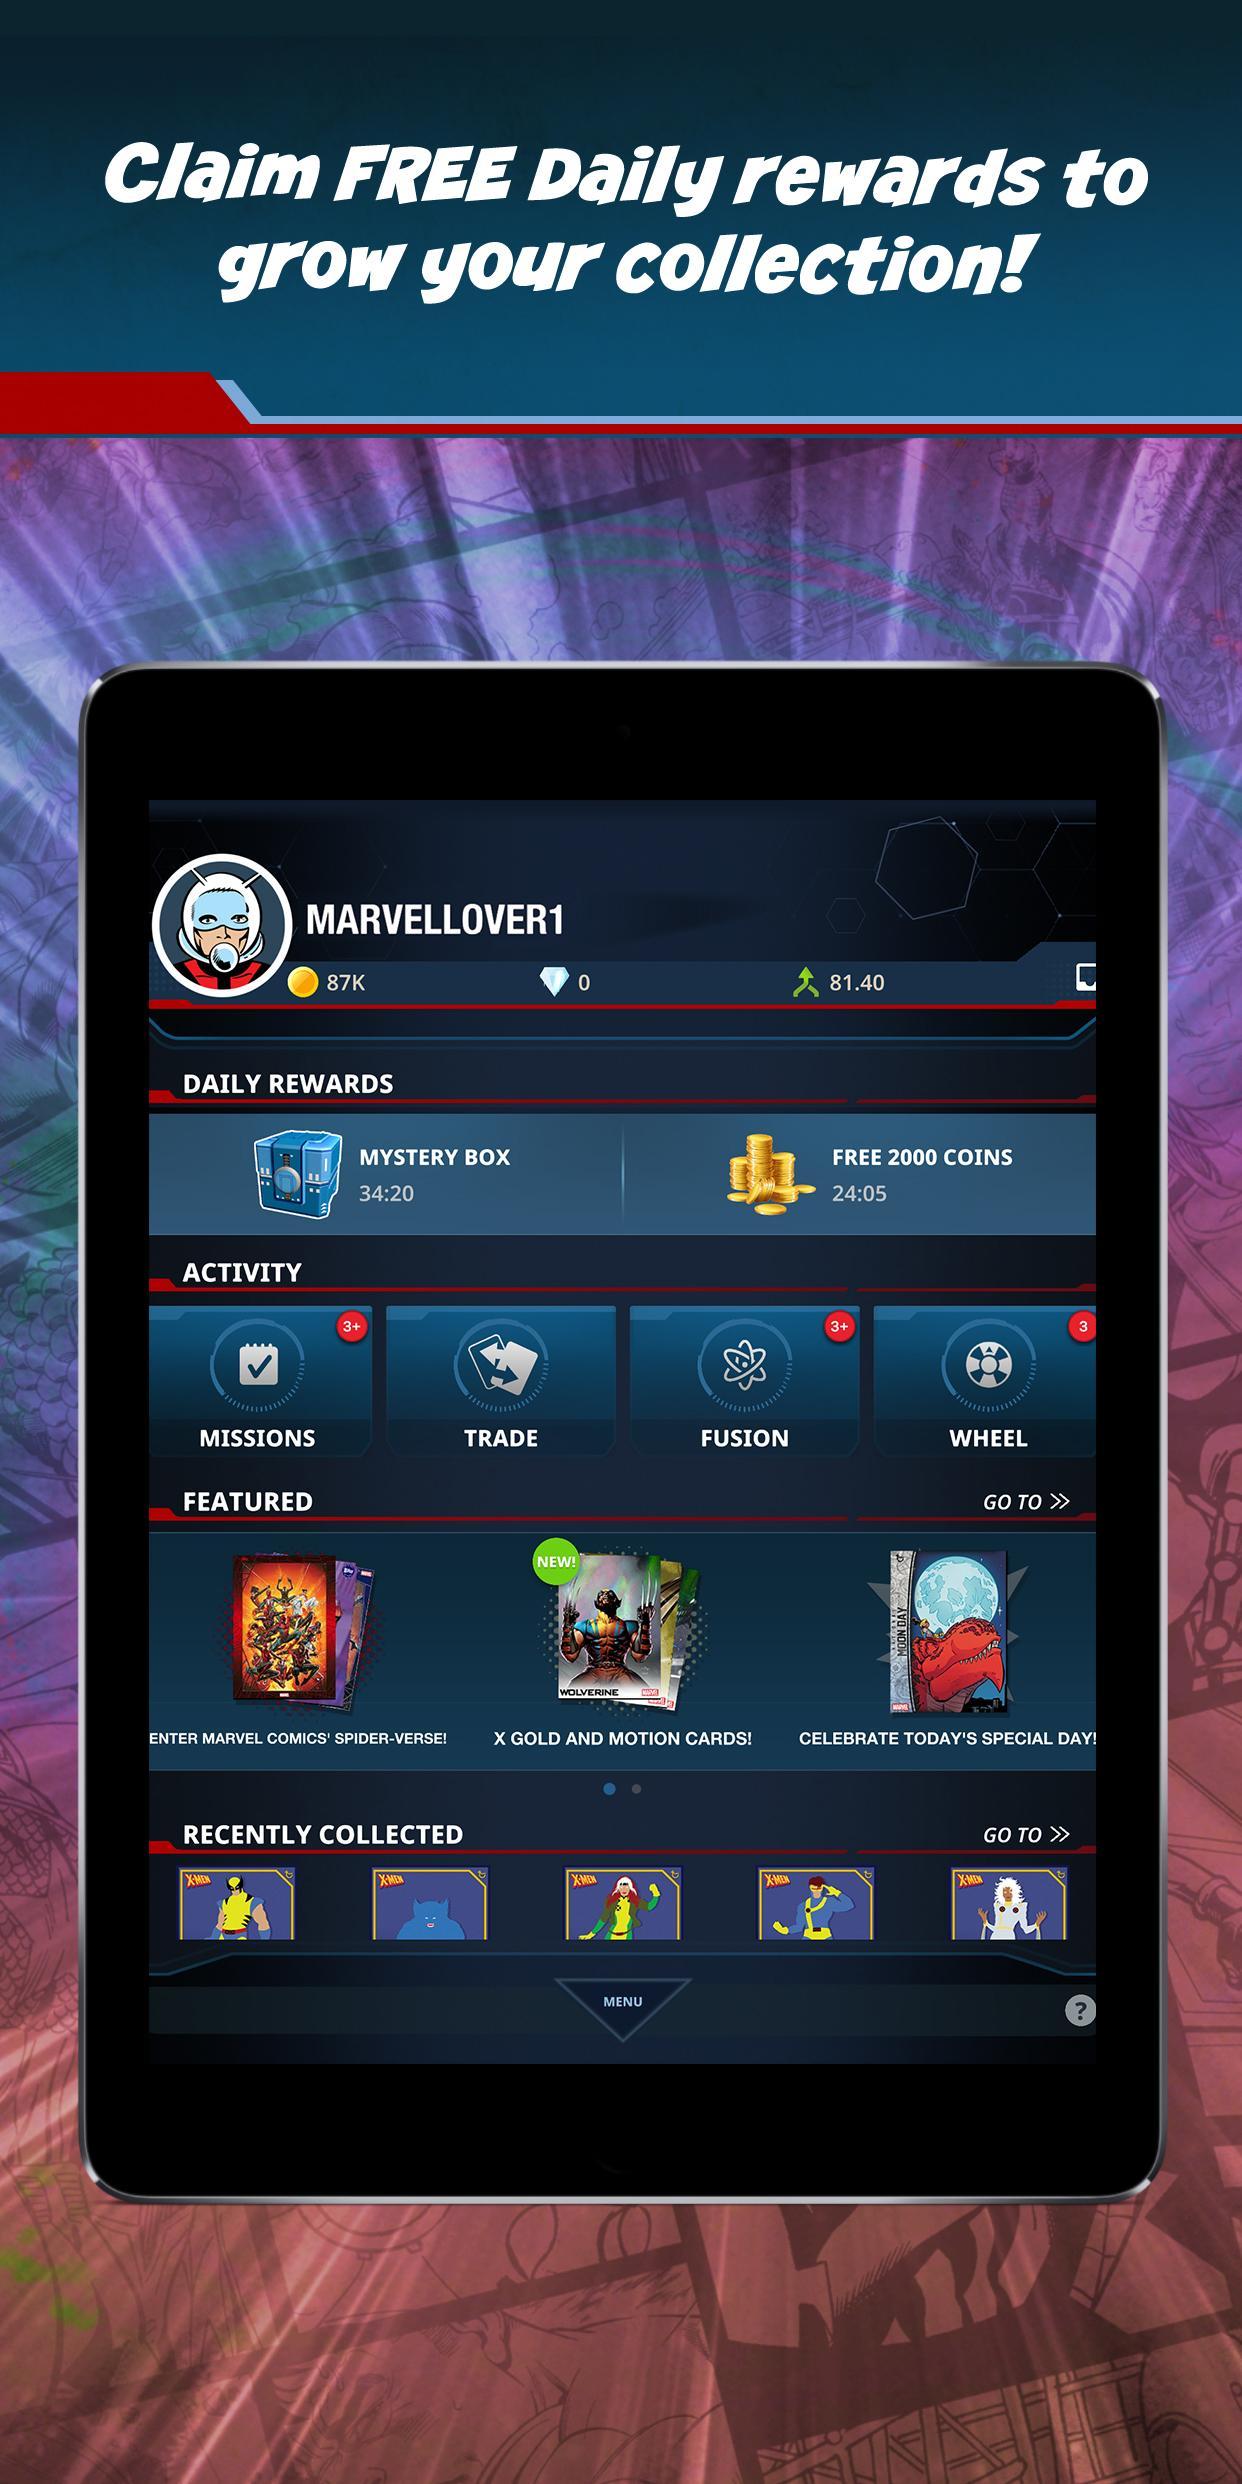 Marvel Collect! by Topps Card Trader 14.0.0 Screenshot 22